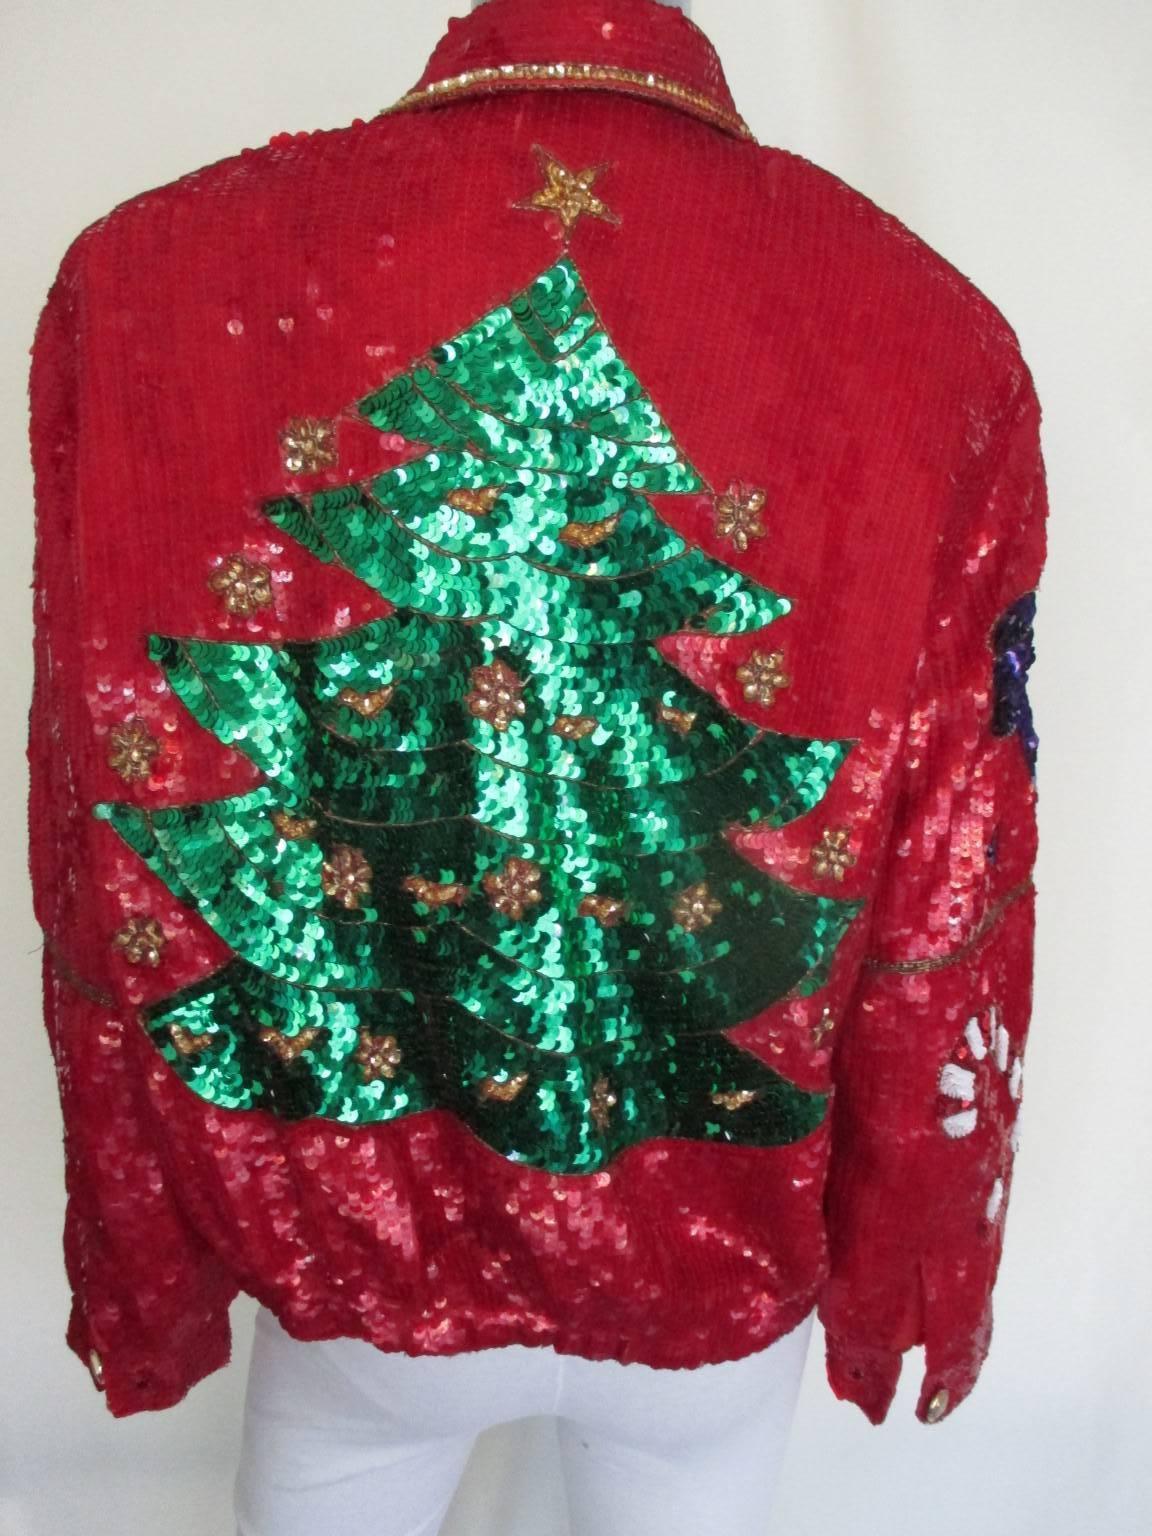 This vintage jacket is made of all-over sequins with descriptions Xmas items.

We offer more sequin vintage items, view our frontstore
Details;
With 6 presbuttons , 2 pockets and is elasticized at hem and fully lined.
Size fits like a small to